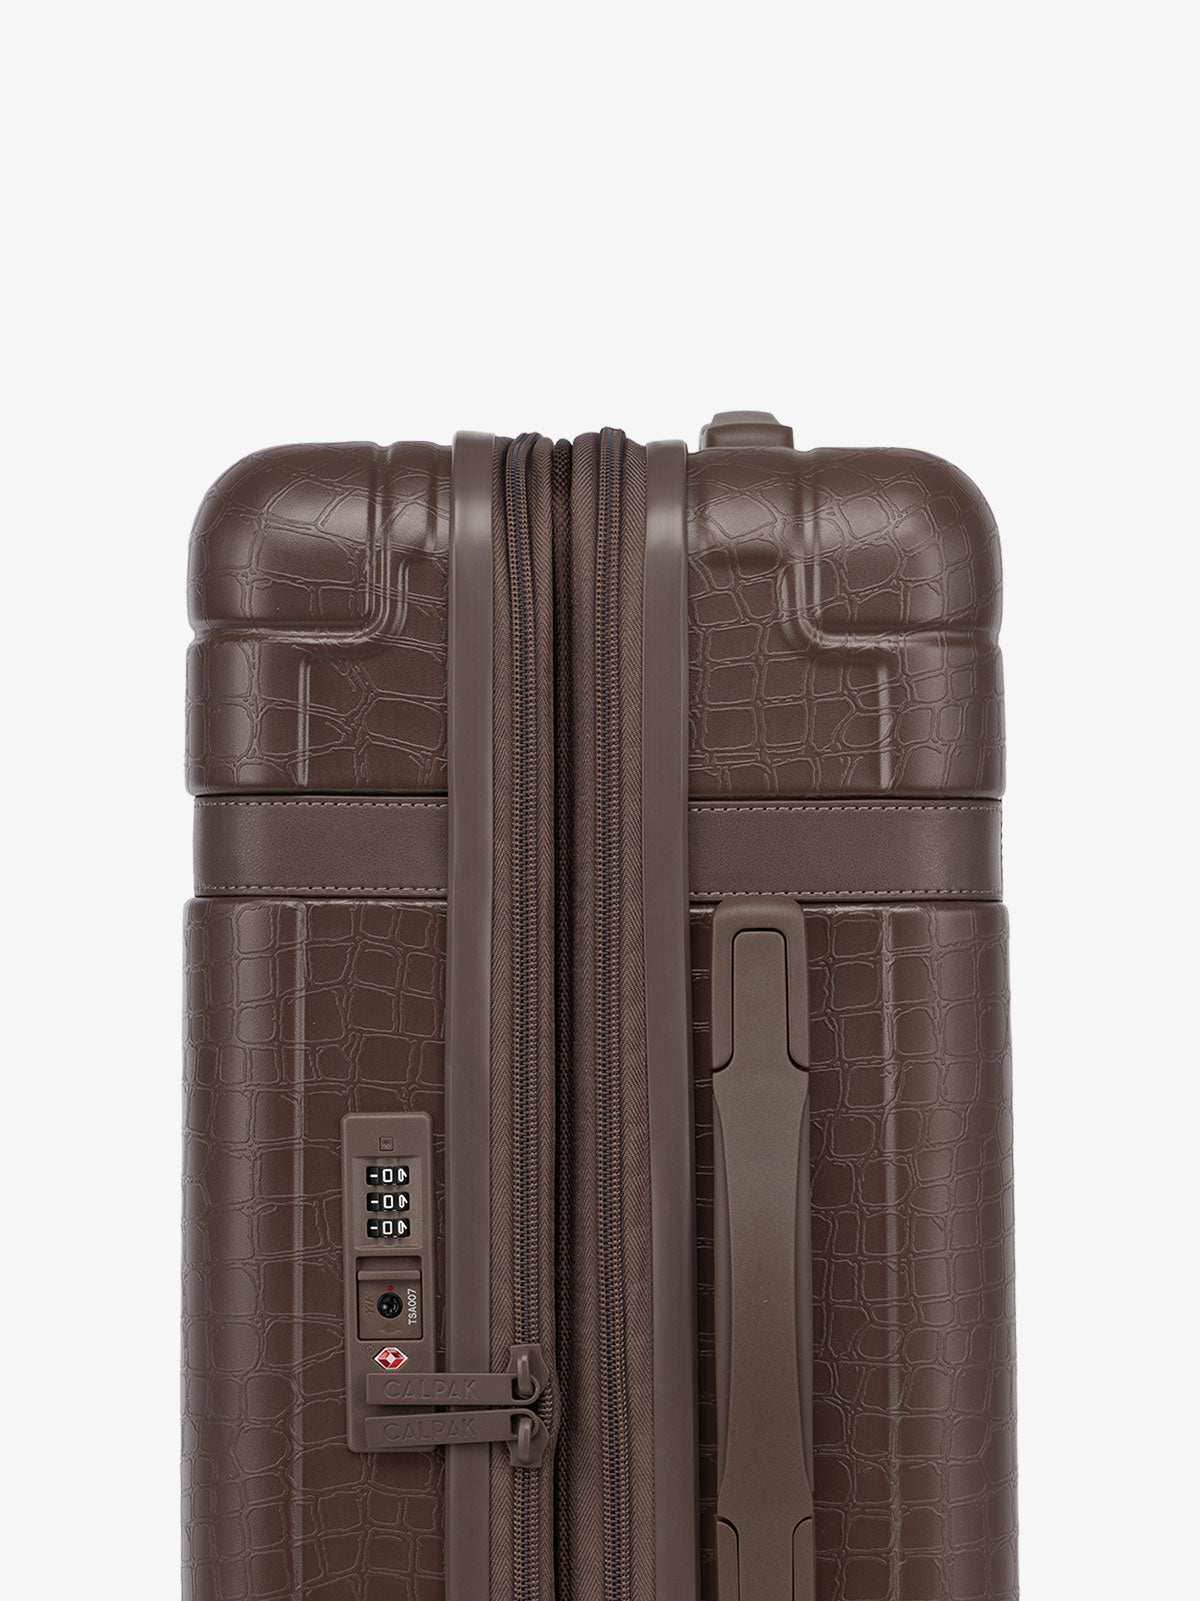 CALPAK TRNK luggage with hardshell exterior, tsa lock and top and side handles in espresso